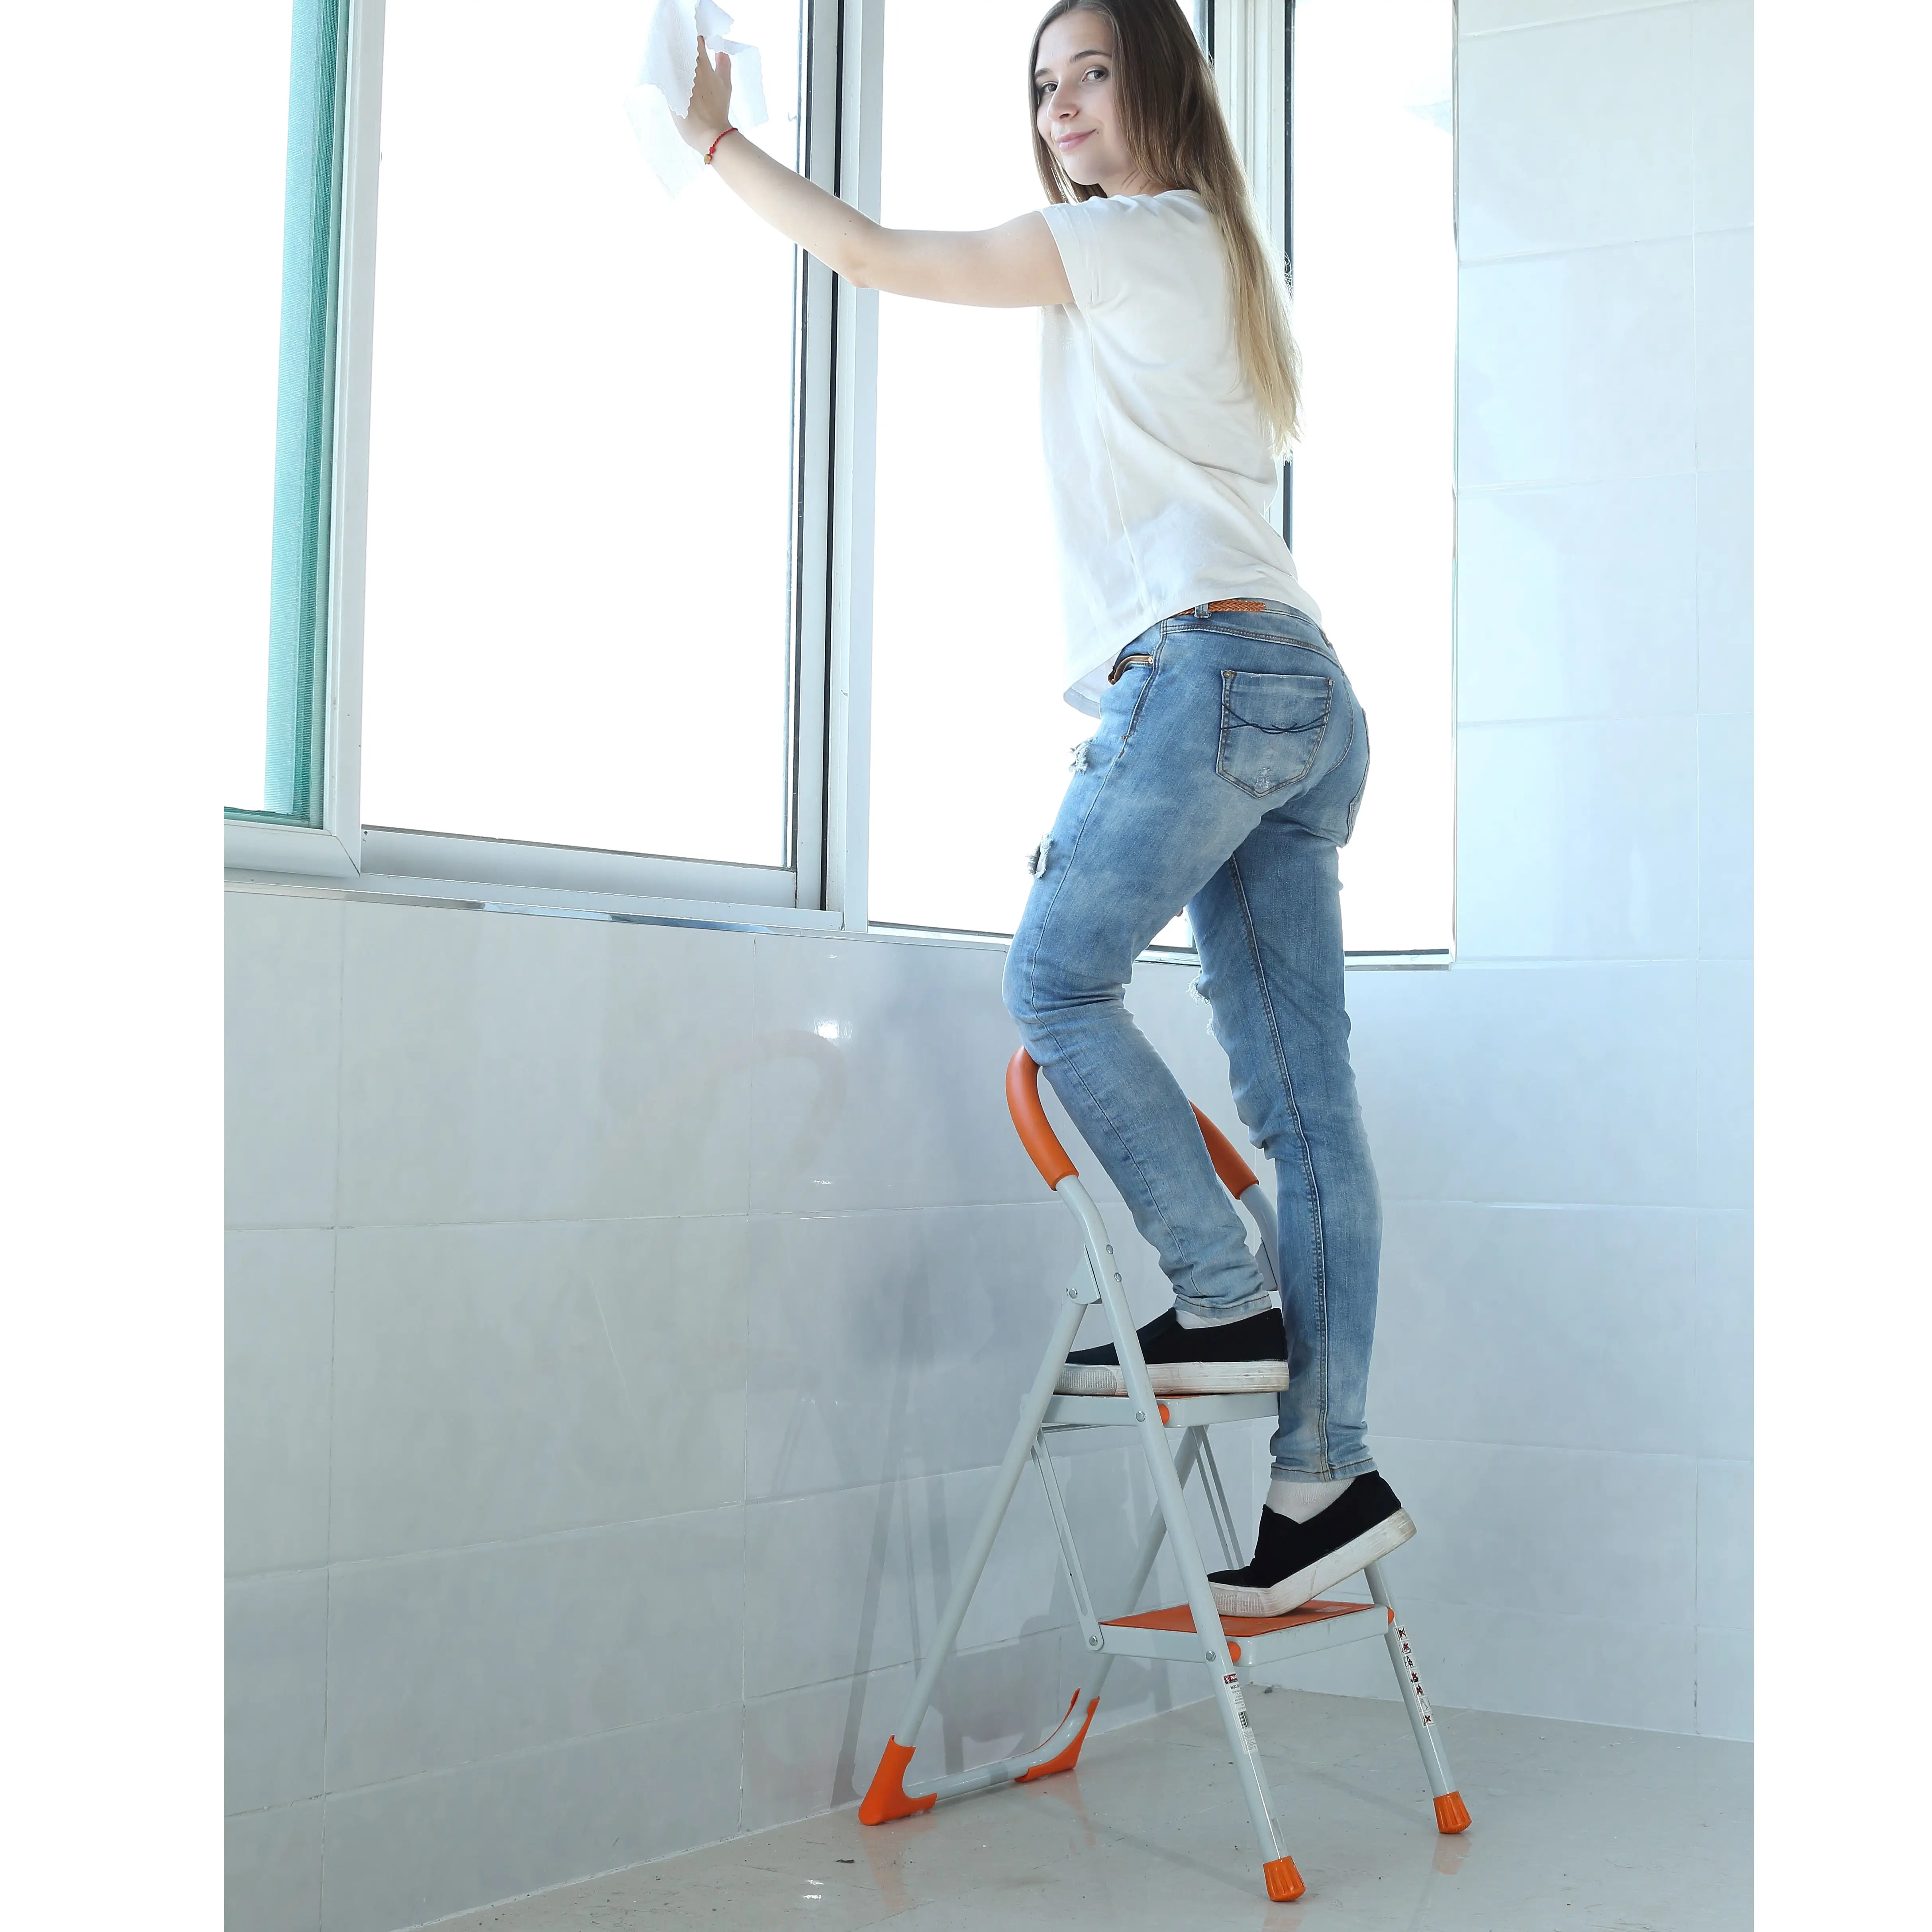 How to choose and use the right ladder for safe work?